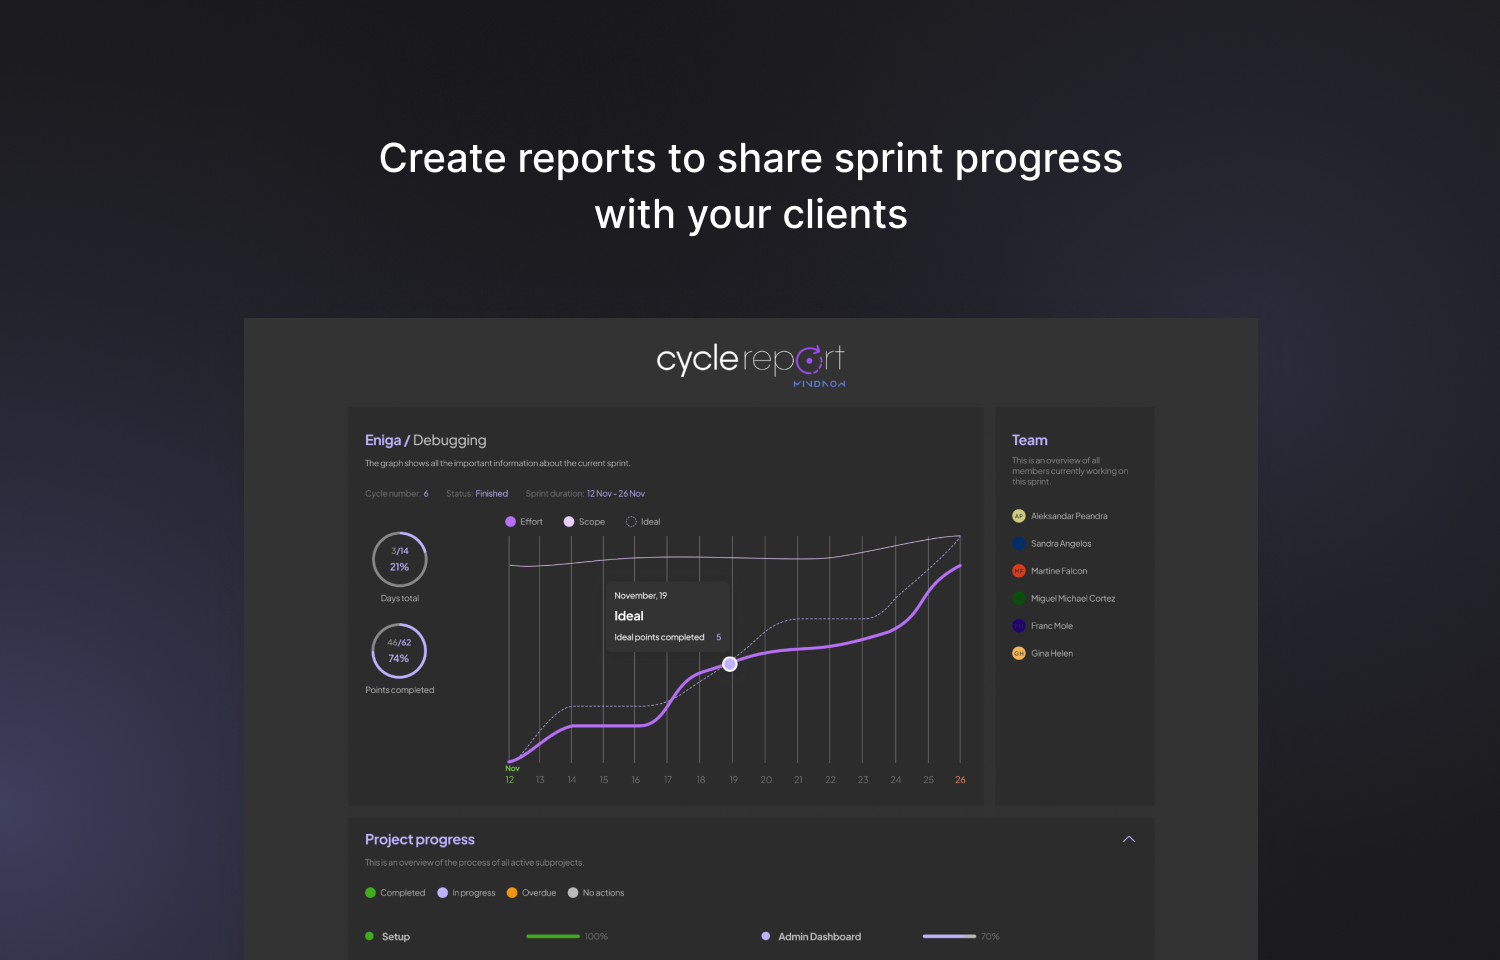 Cycle reports site showing sprint progress to share with clients